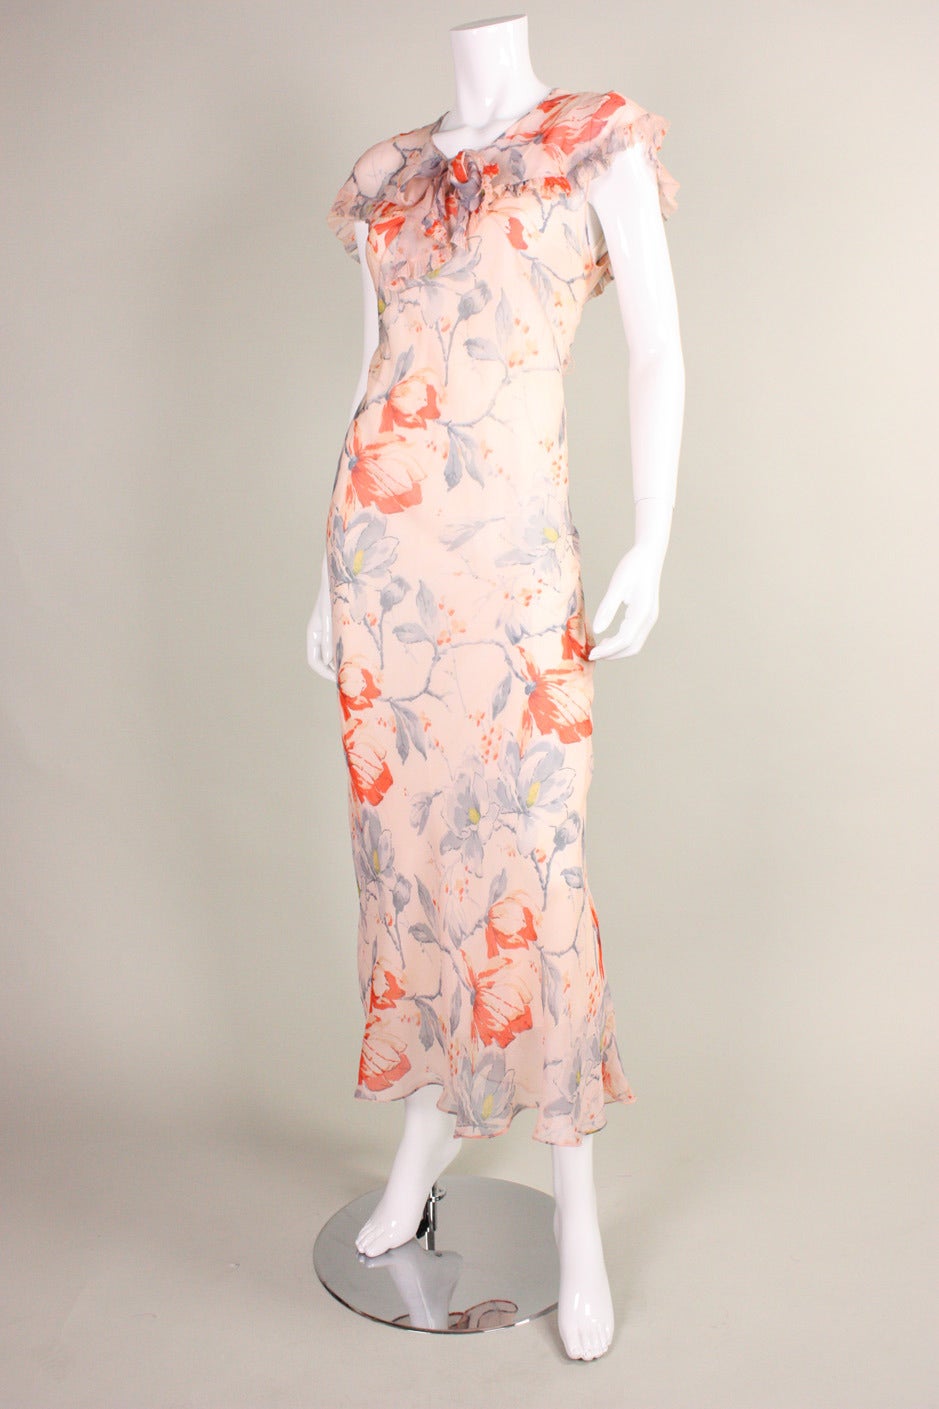 Lovely dress dates to the 1930's and is made of pale peach silk chiffon with a floral print in hues of orange and blue.  V-neck with center front bow and small key hole opening.  Middy collar with ruffled trim.  No closures.  Unlined but comes with